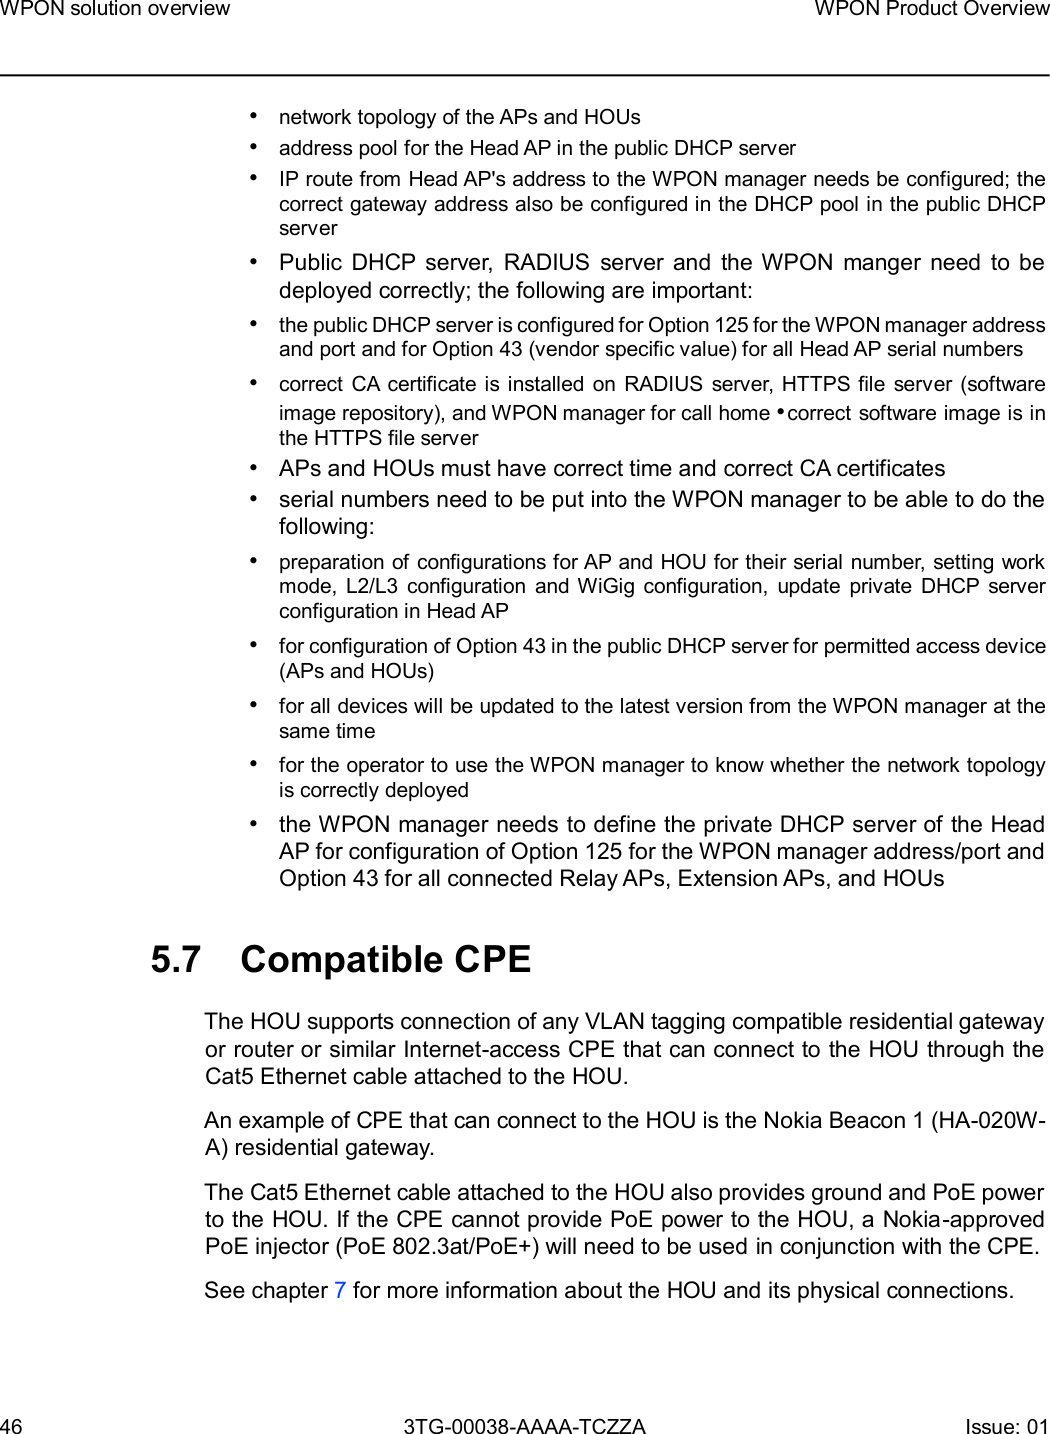 Page 46 of Nokia Bell 7577WPONAPED WPON User Manual WPON Product Overview